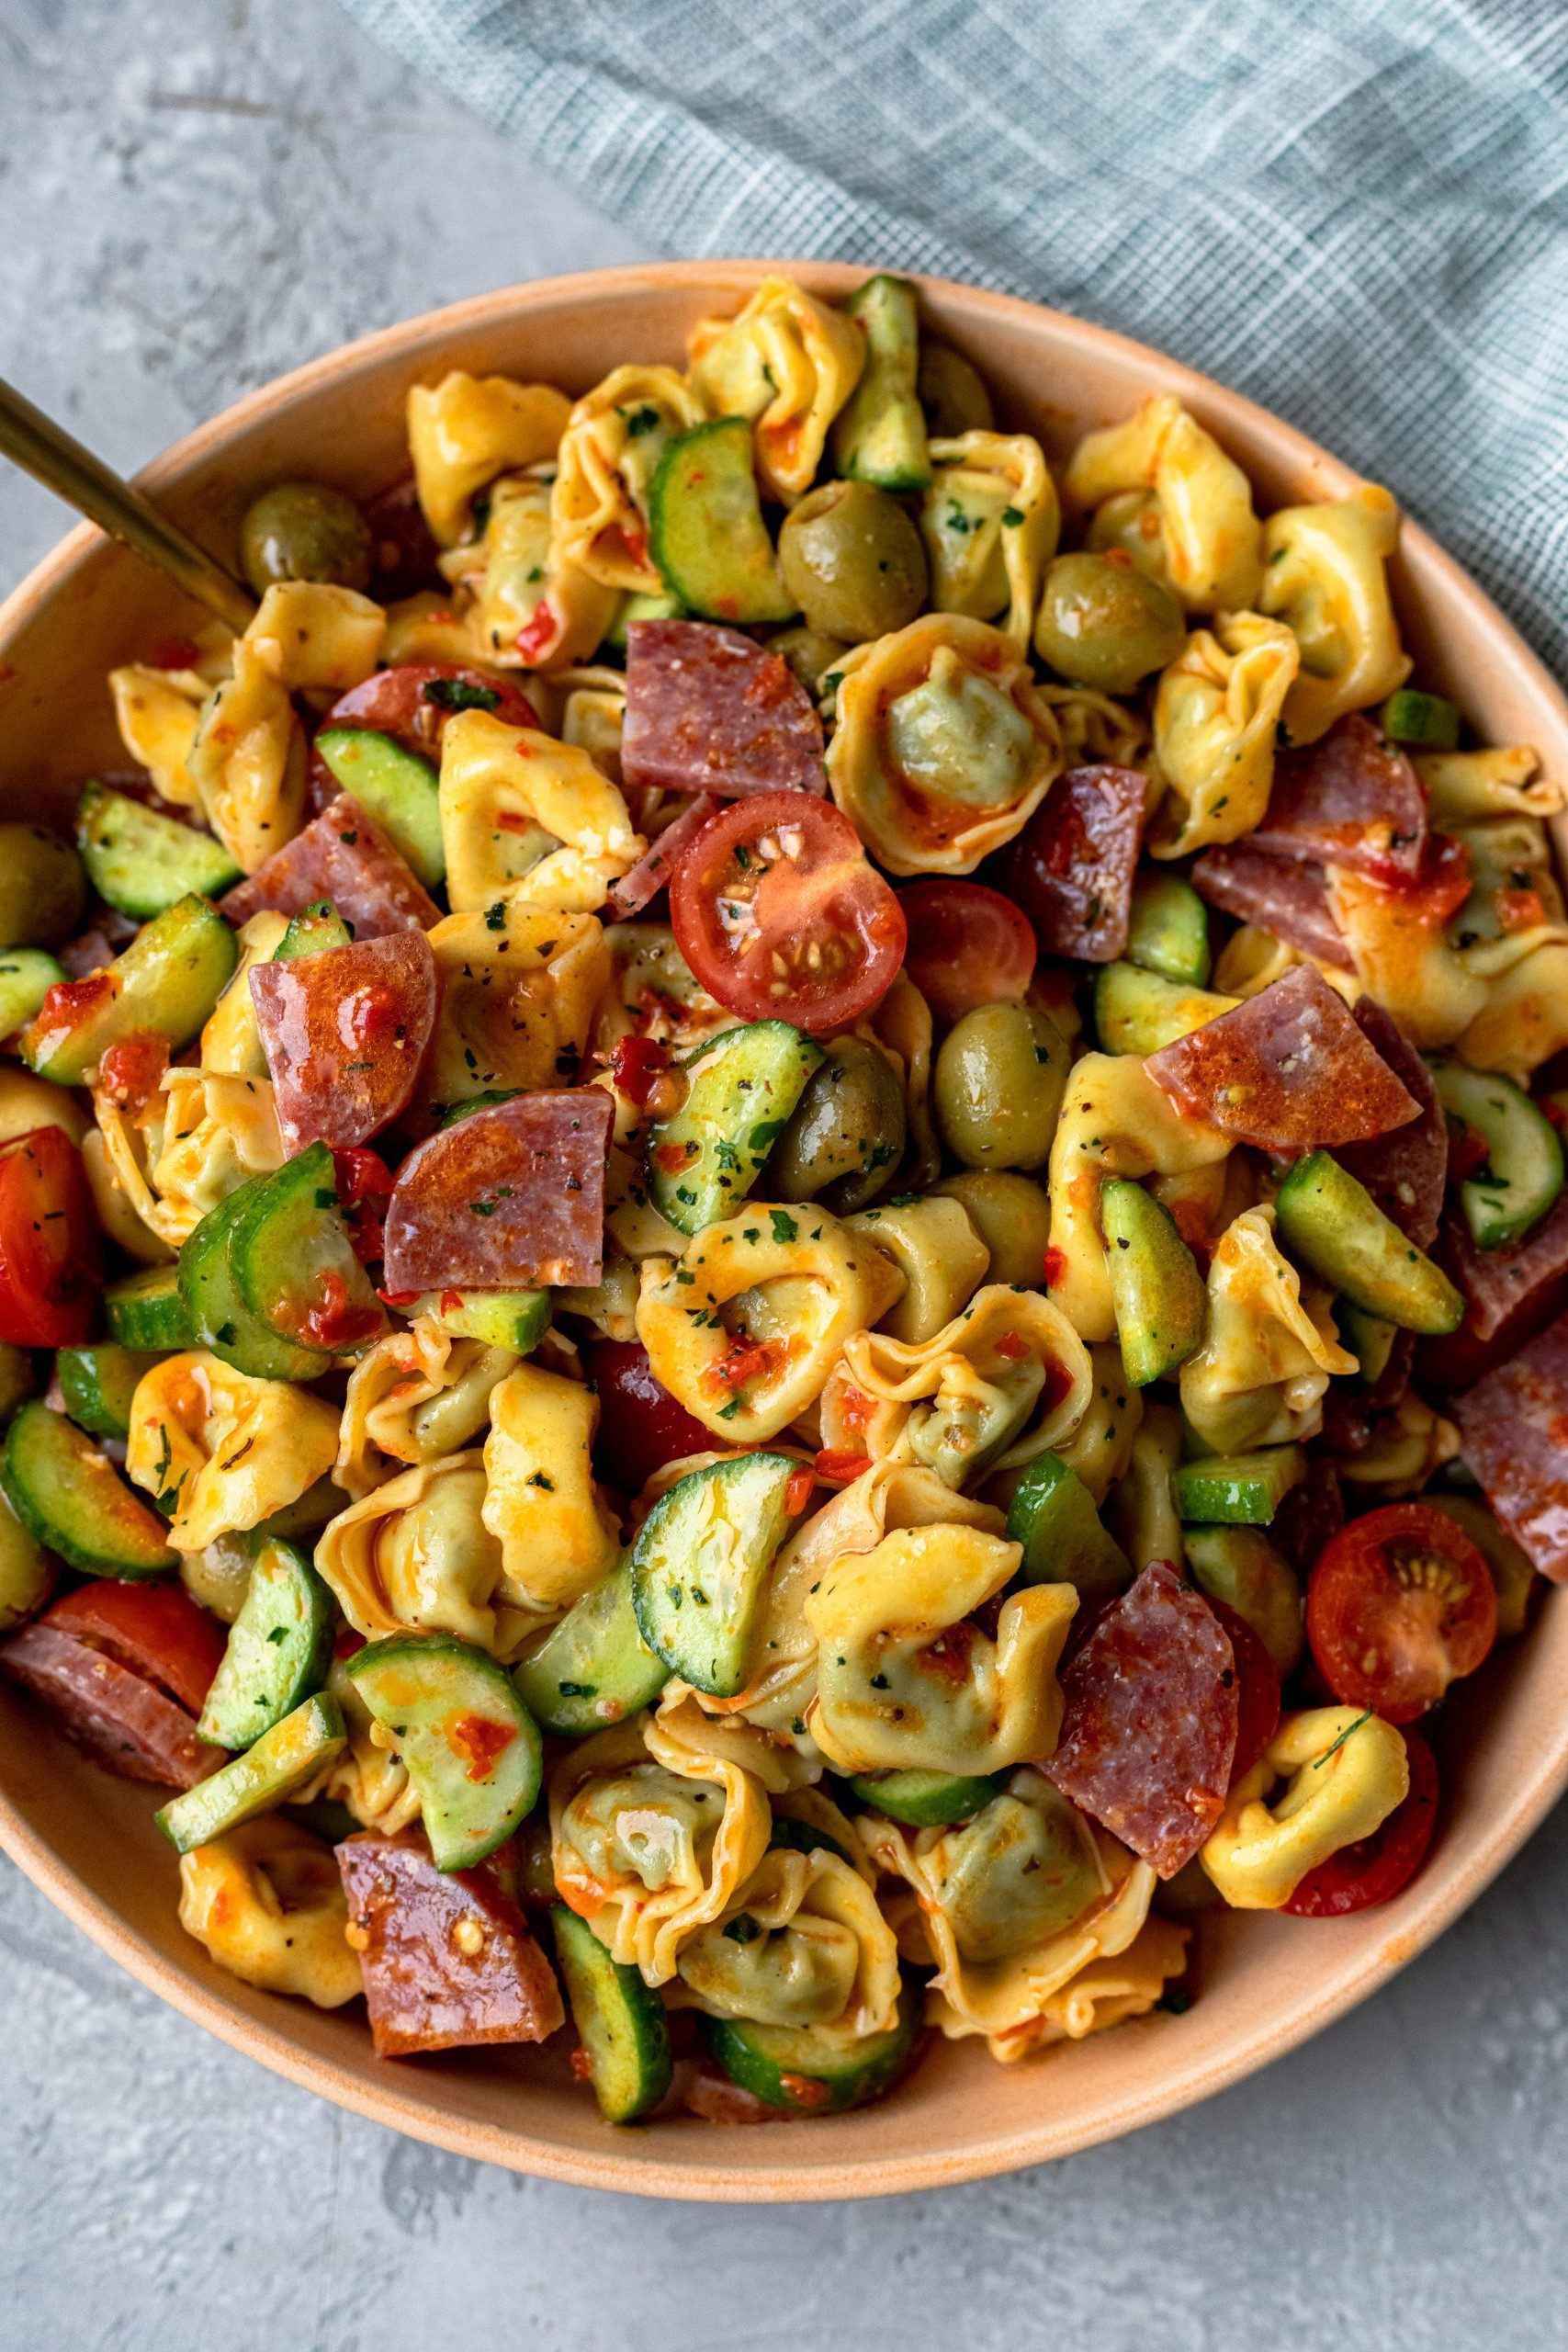 Close up of spicy tortellini pasta salad, showcasing all the ingredients - fresh cucumber, tomato, green olives, salami, pepperoni and cheese filled tortellini.